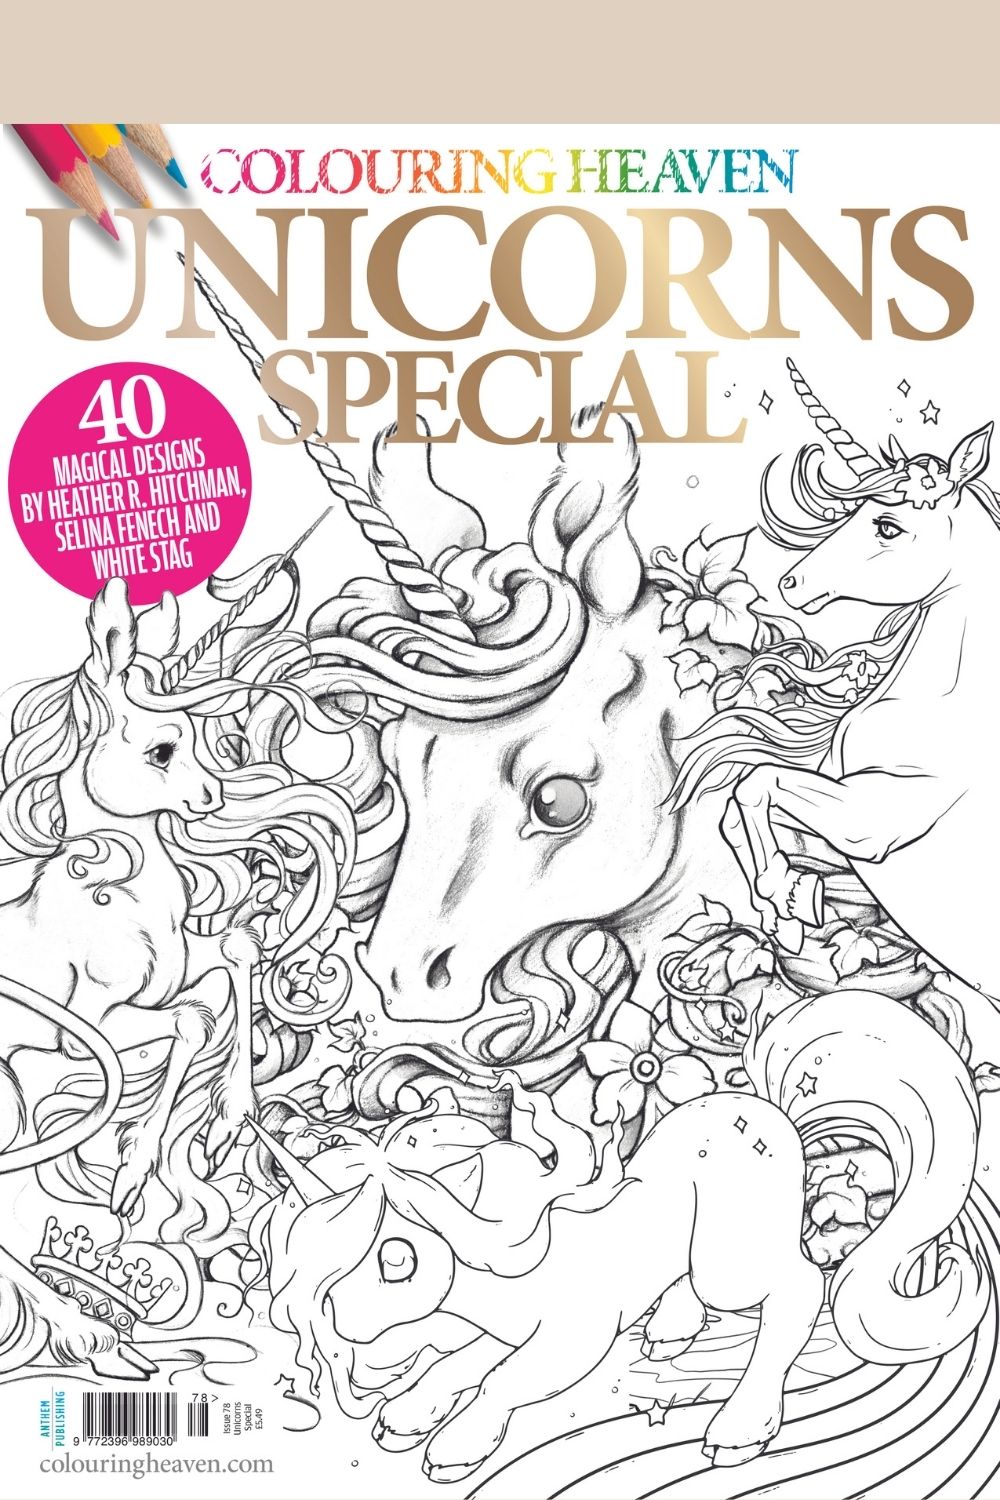 Front cover of colouring Heaven Unicorns Special Issue 78